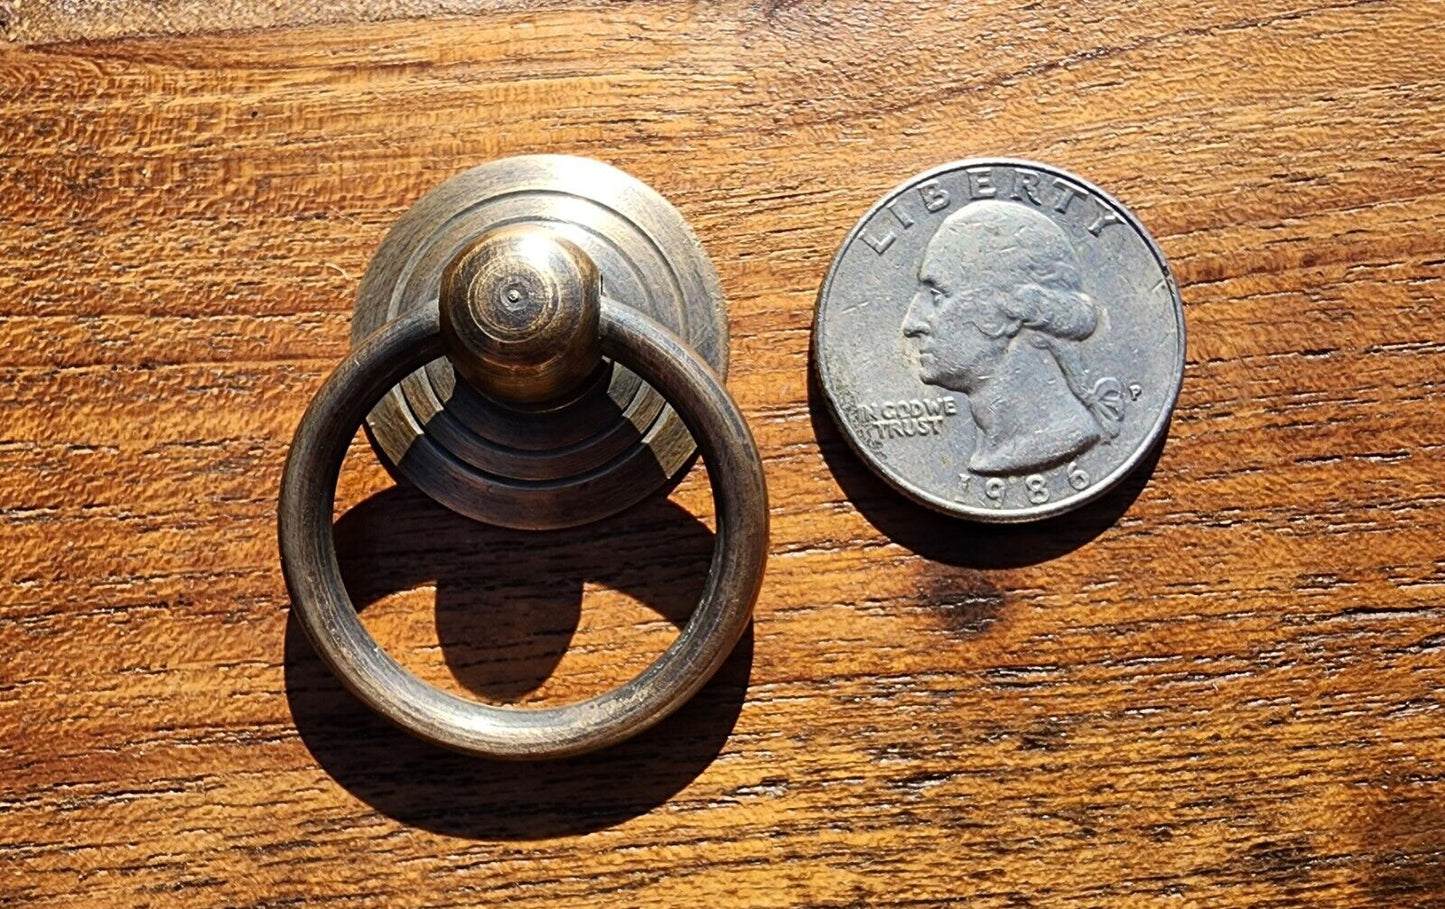 2 x  Rustic Antique Style Brass Round Ring Pull Handles 1" round backplate #H17